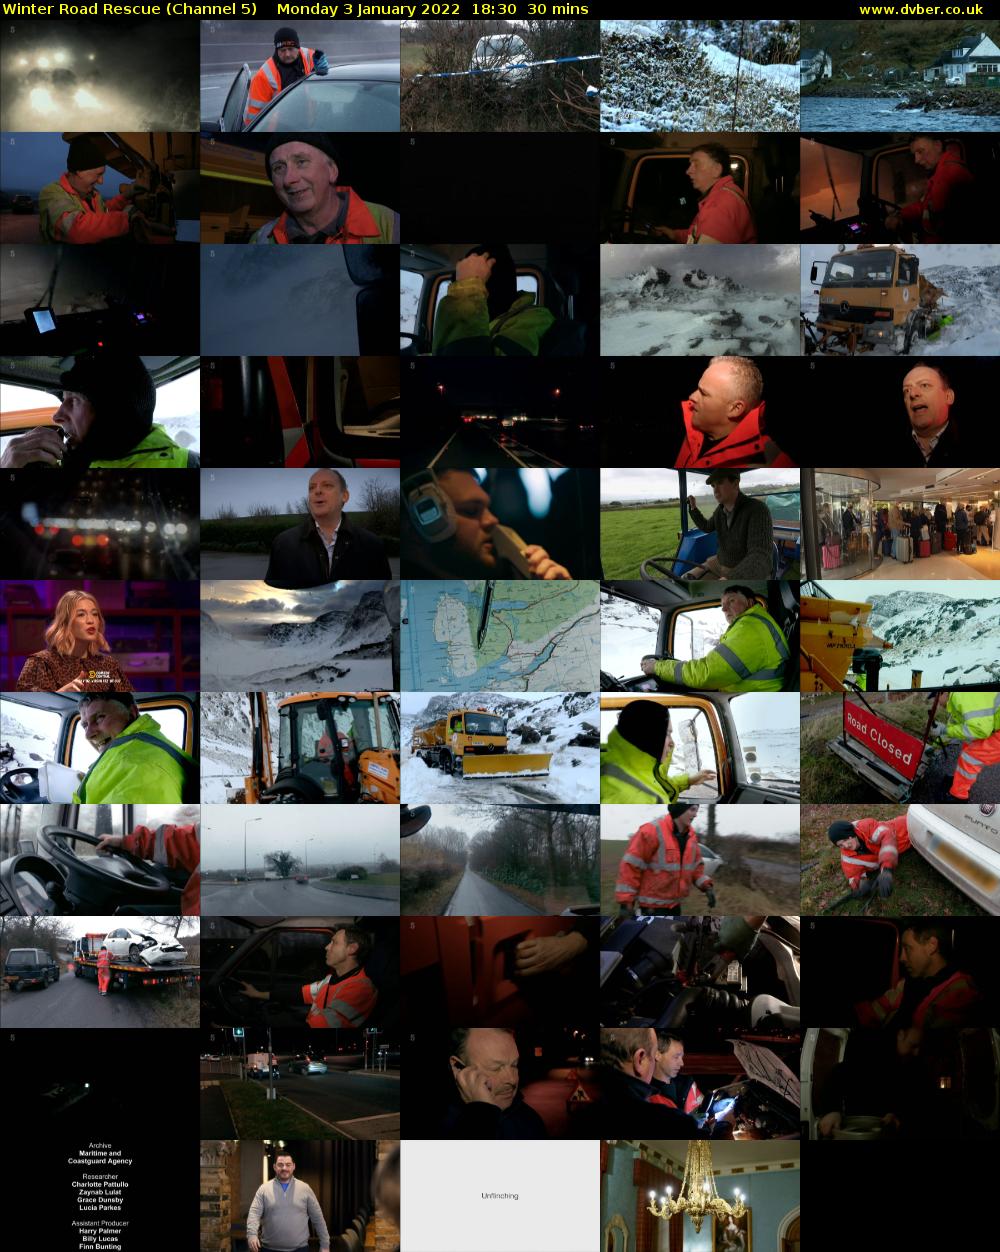 Winter Road Rescue (Channel 5) Monday 3 January 2022 18:30 - 19:00